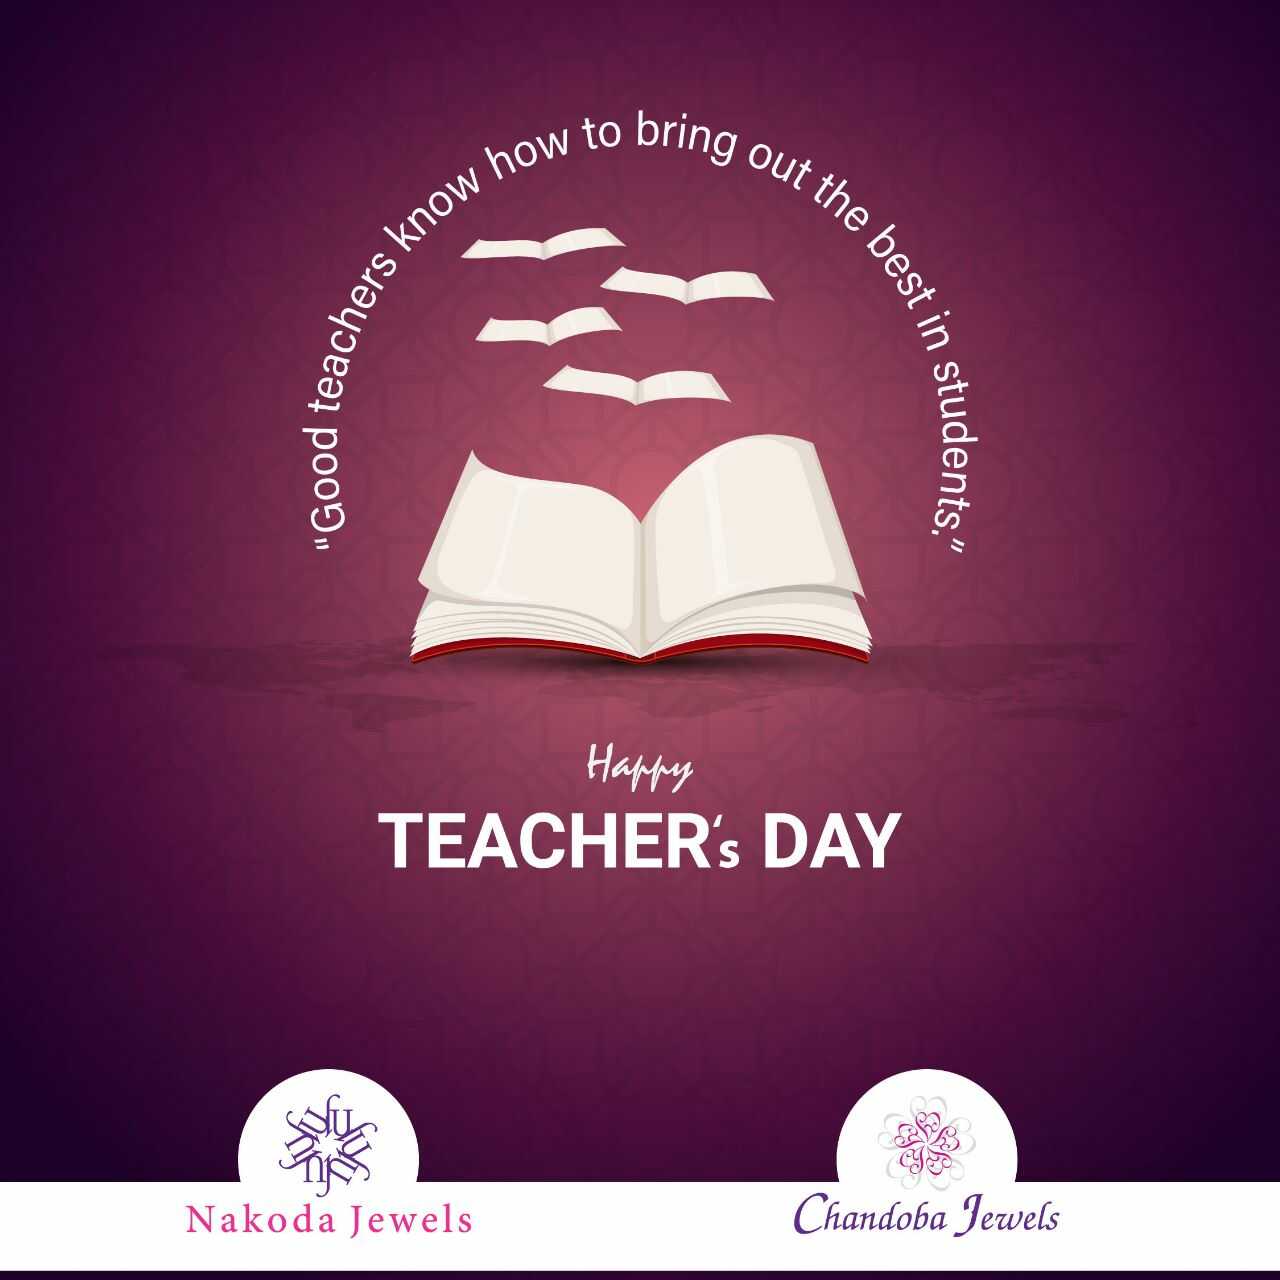 teachers-day,-festival-graphic-design-for-jwellery-show-room